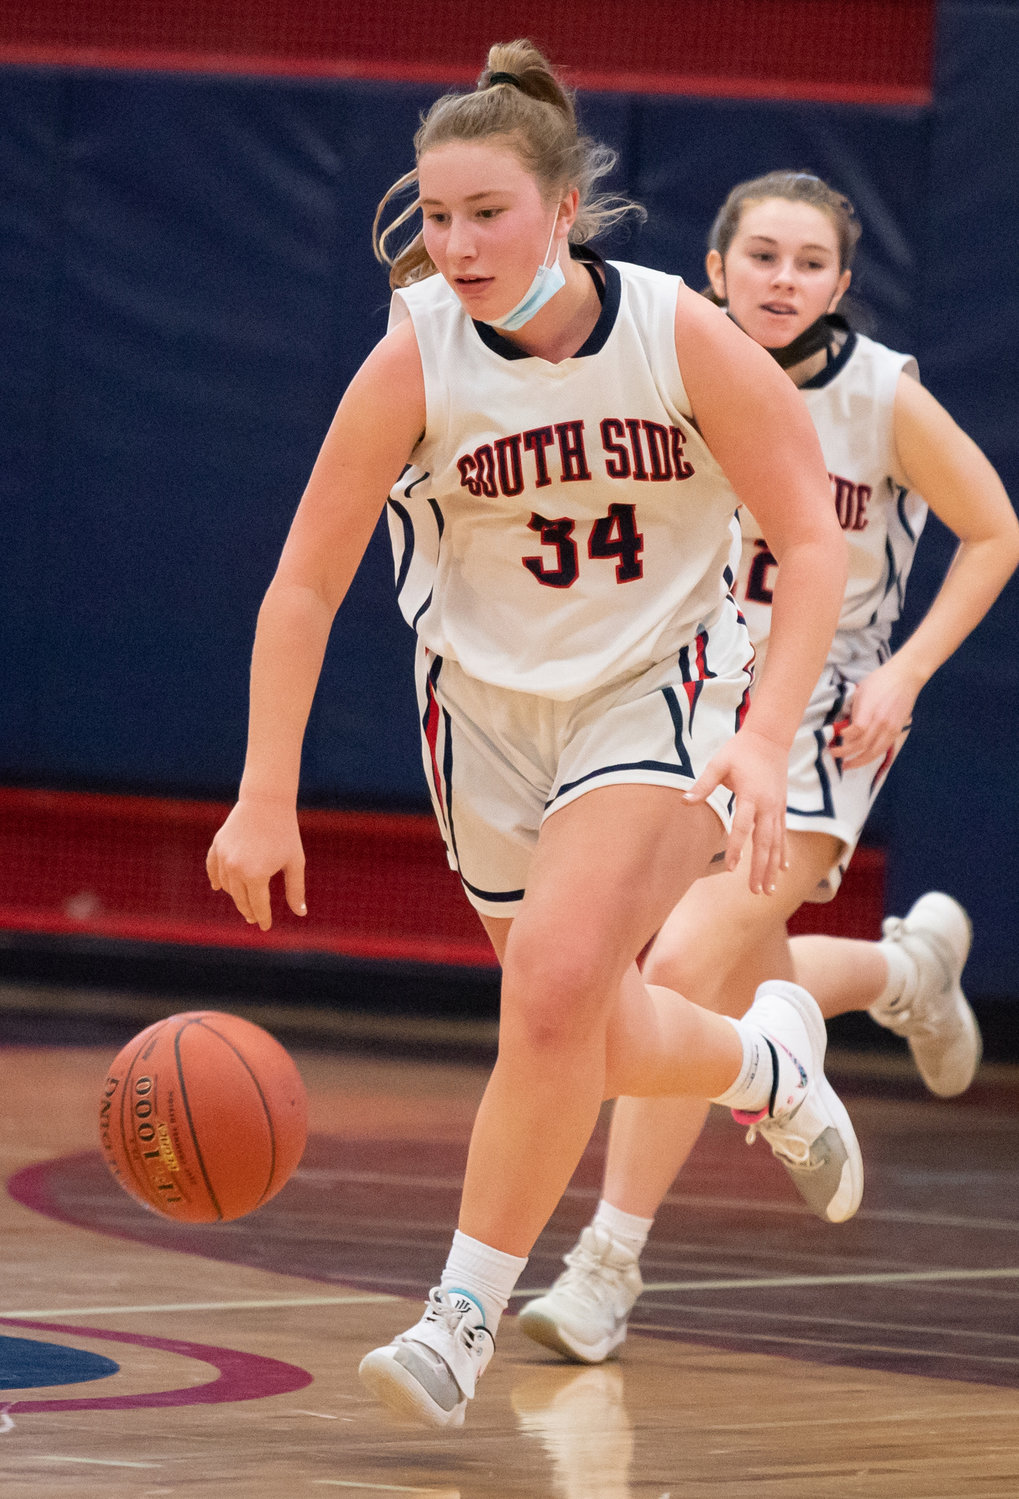 Kyla Murphy scored 10 points last Friday evening to help the Cyclones get back on the winning track with a 54-24 victory over Valley Stream North.